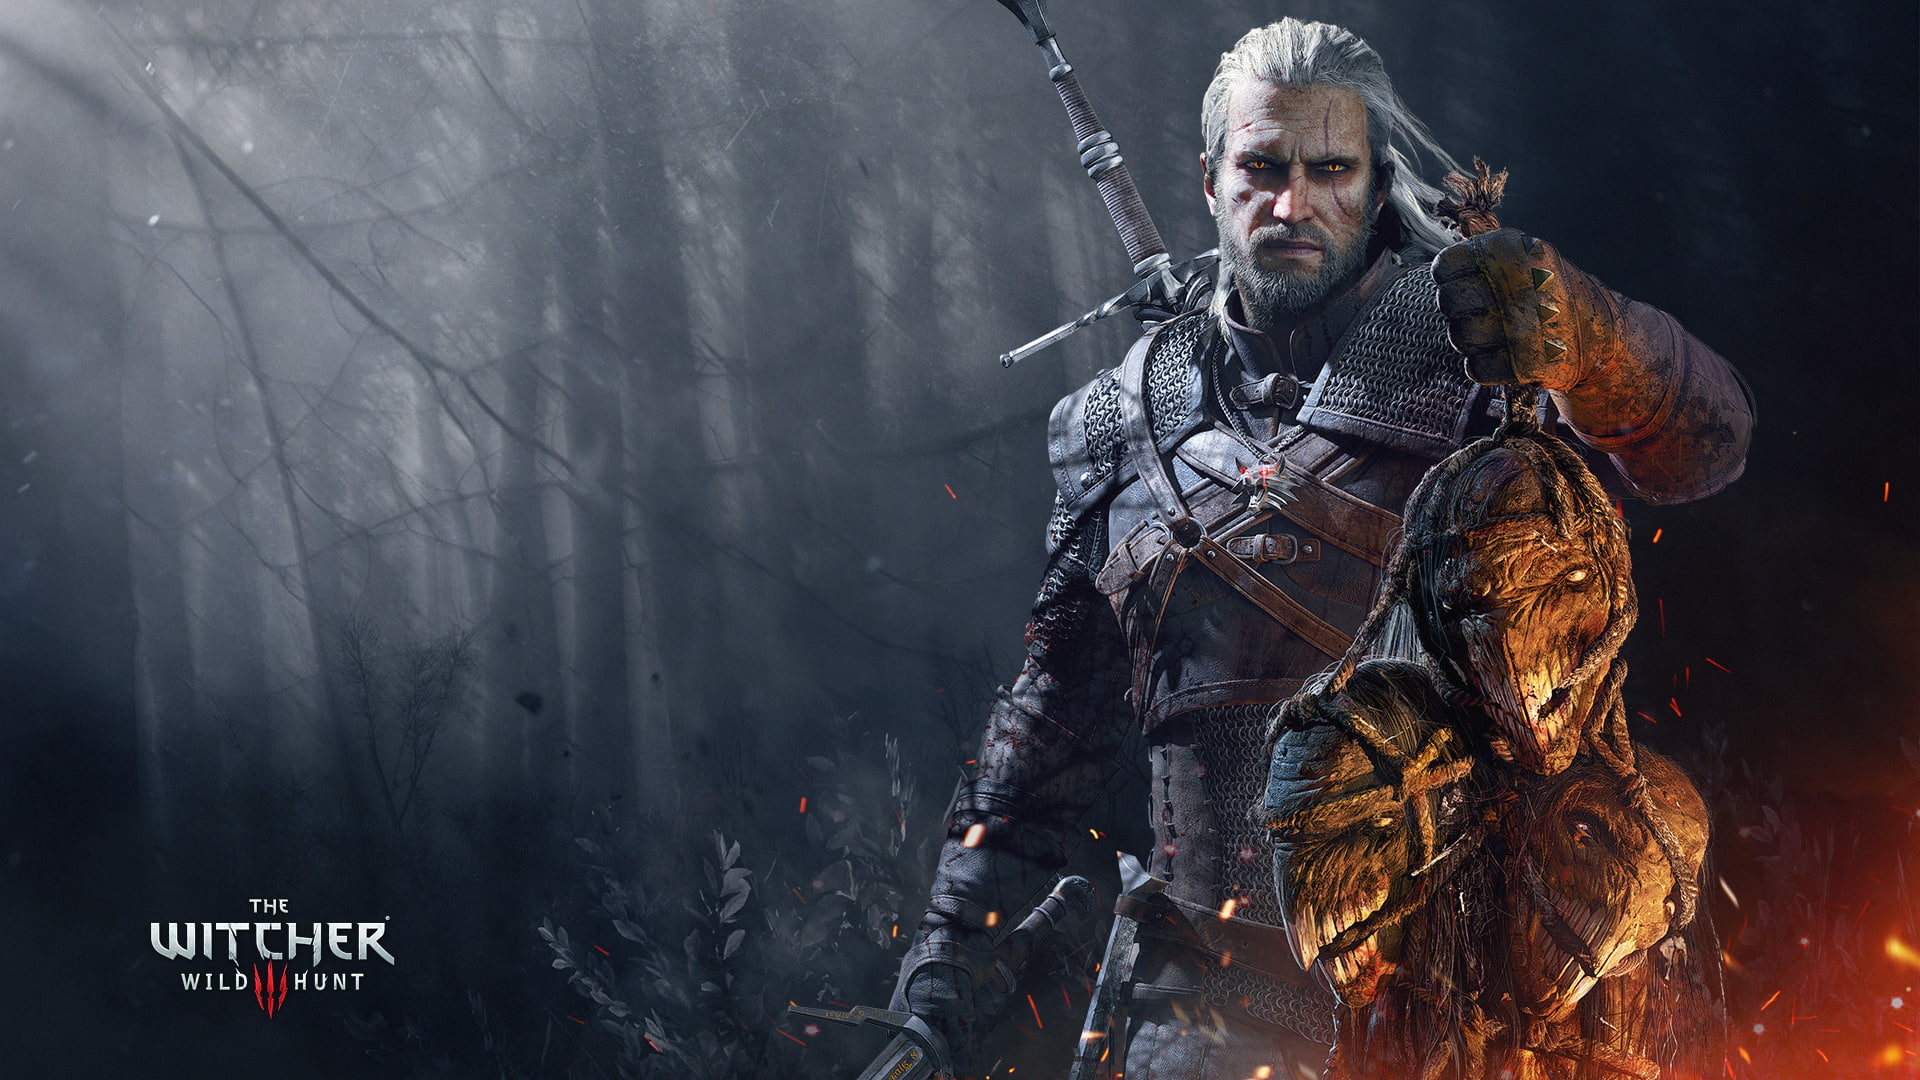 the witcher 3 wild hunt, adult, males, weapon, one person, men